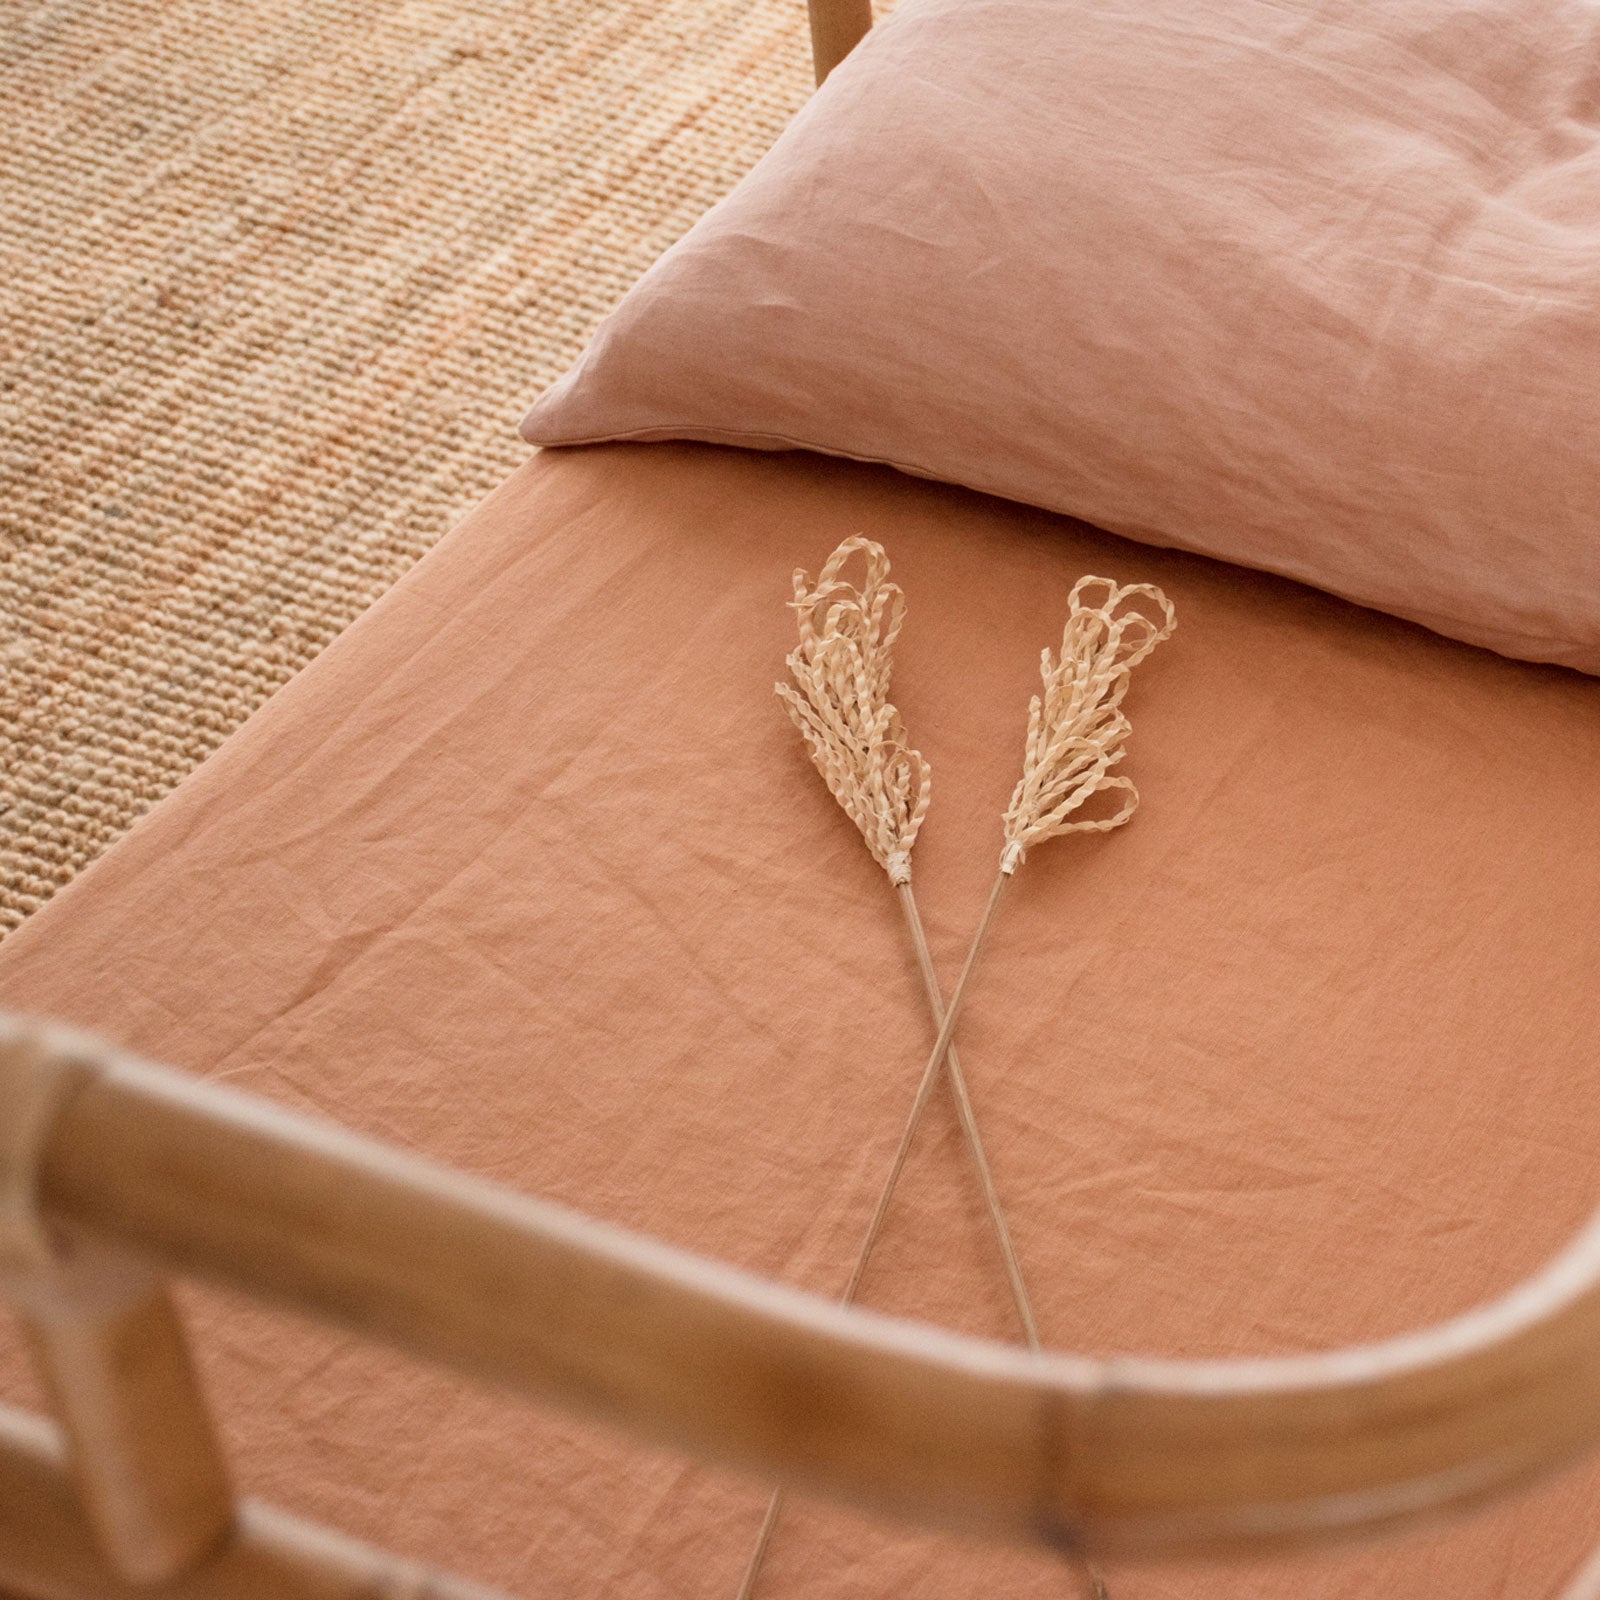 French Flax Linen Bassinet Sheet in Clay